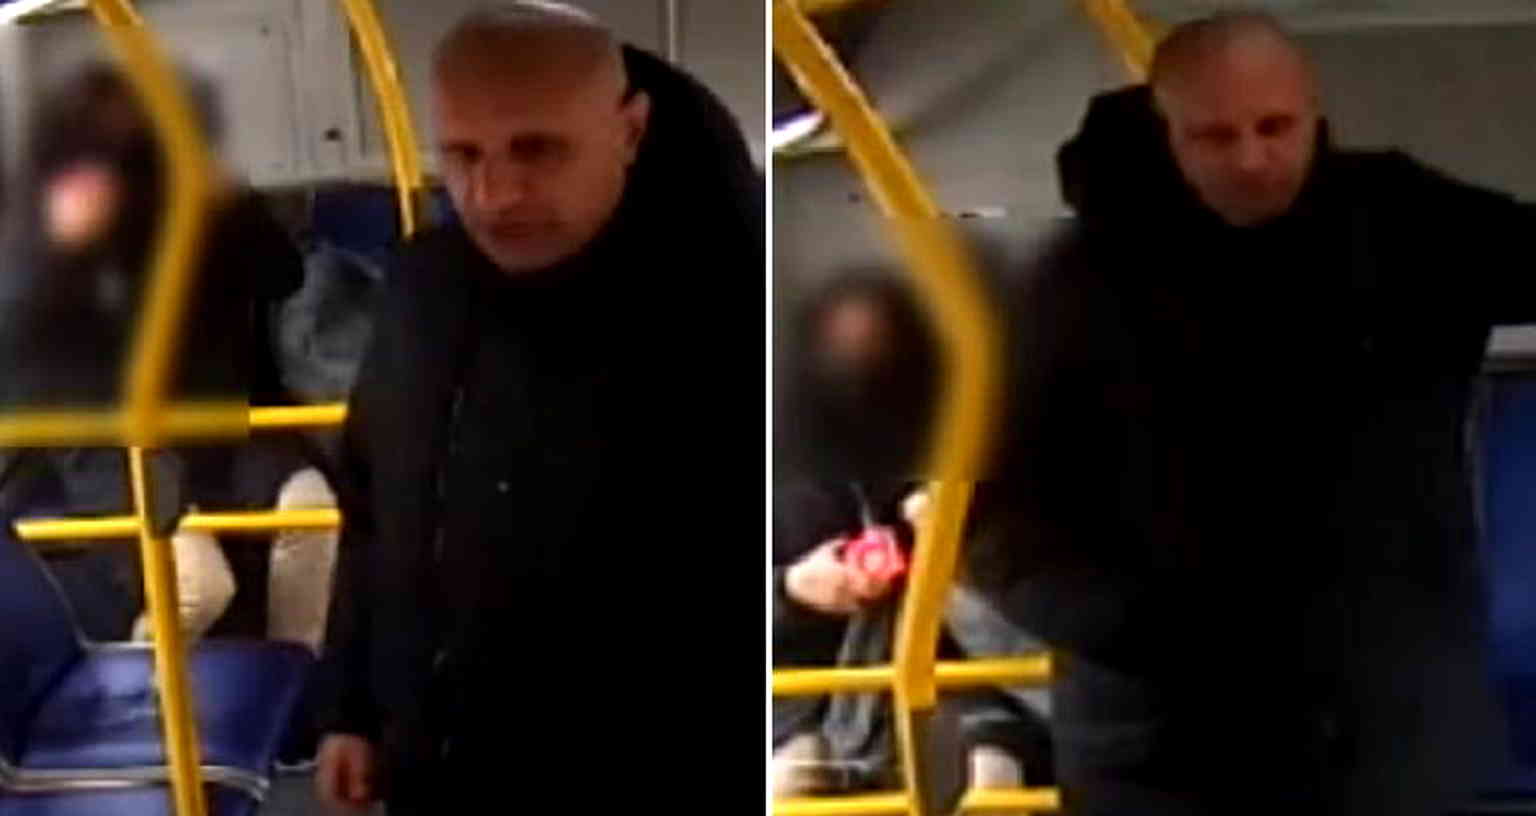 Vancouver authorities seek help identifying suspect in unprovoked attack against teen girl